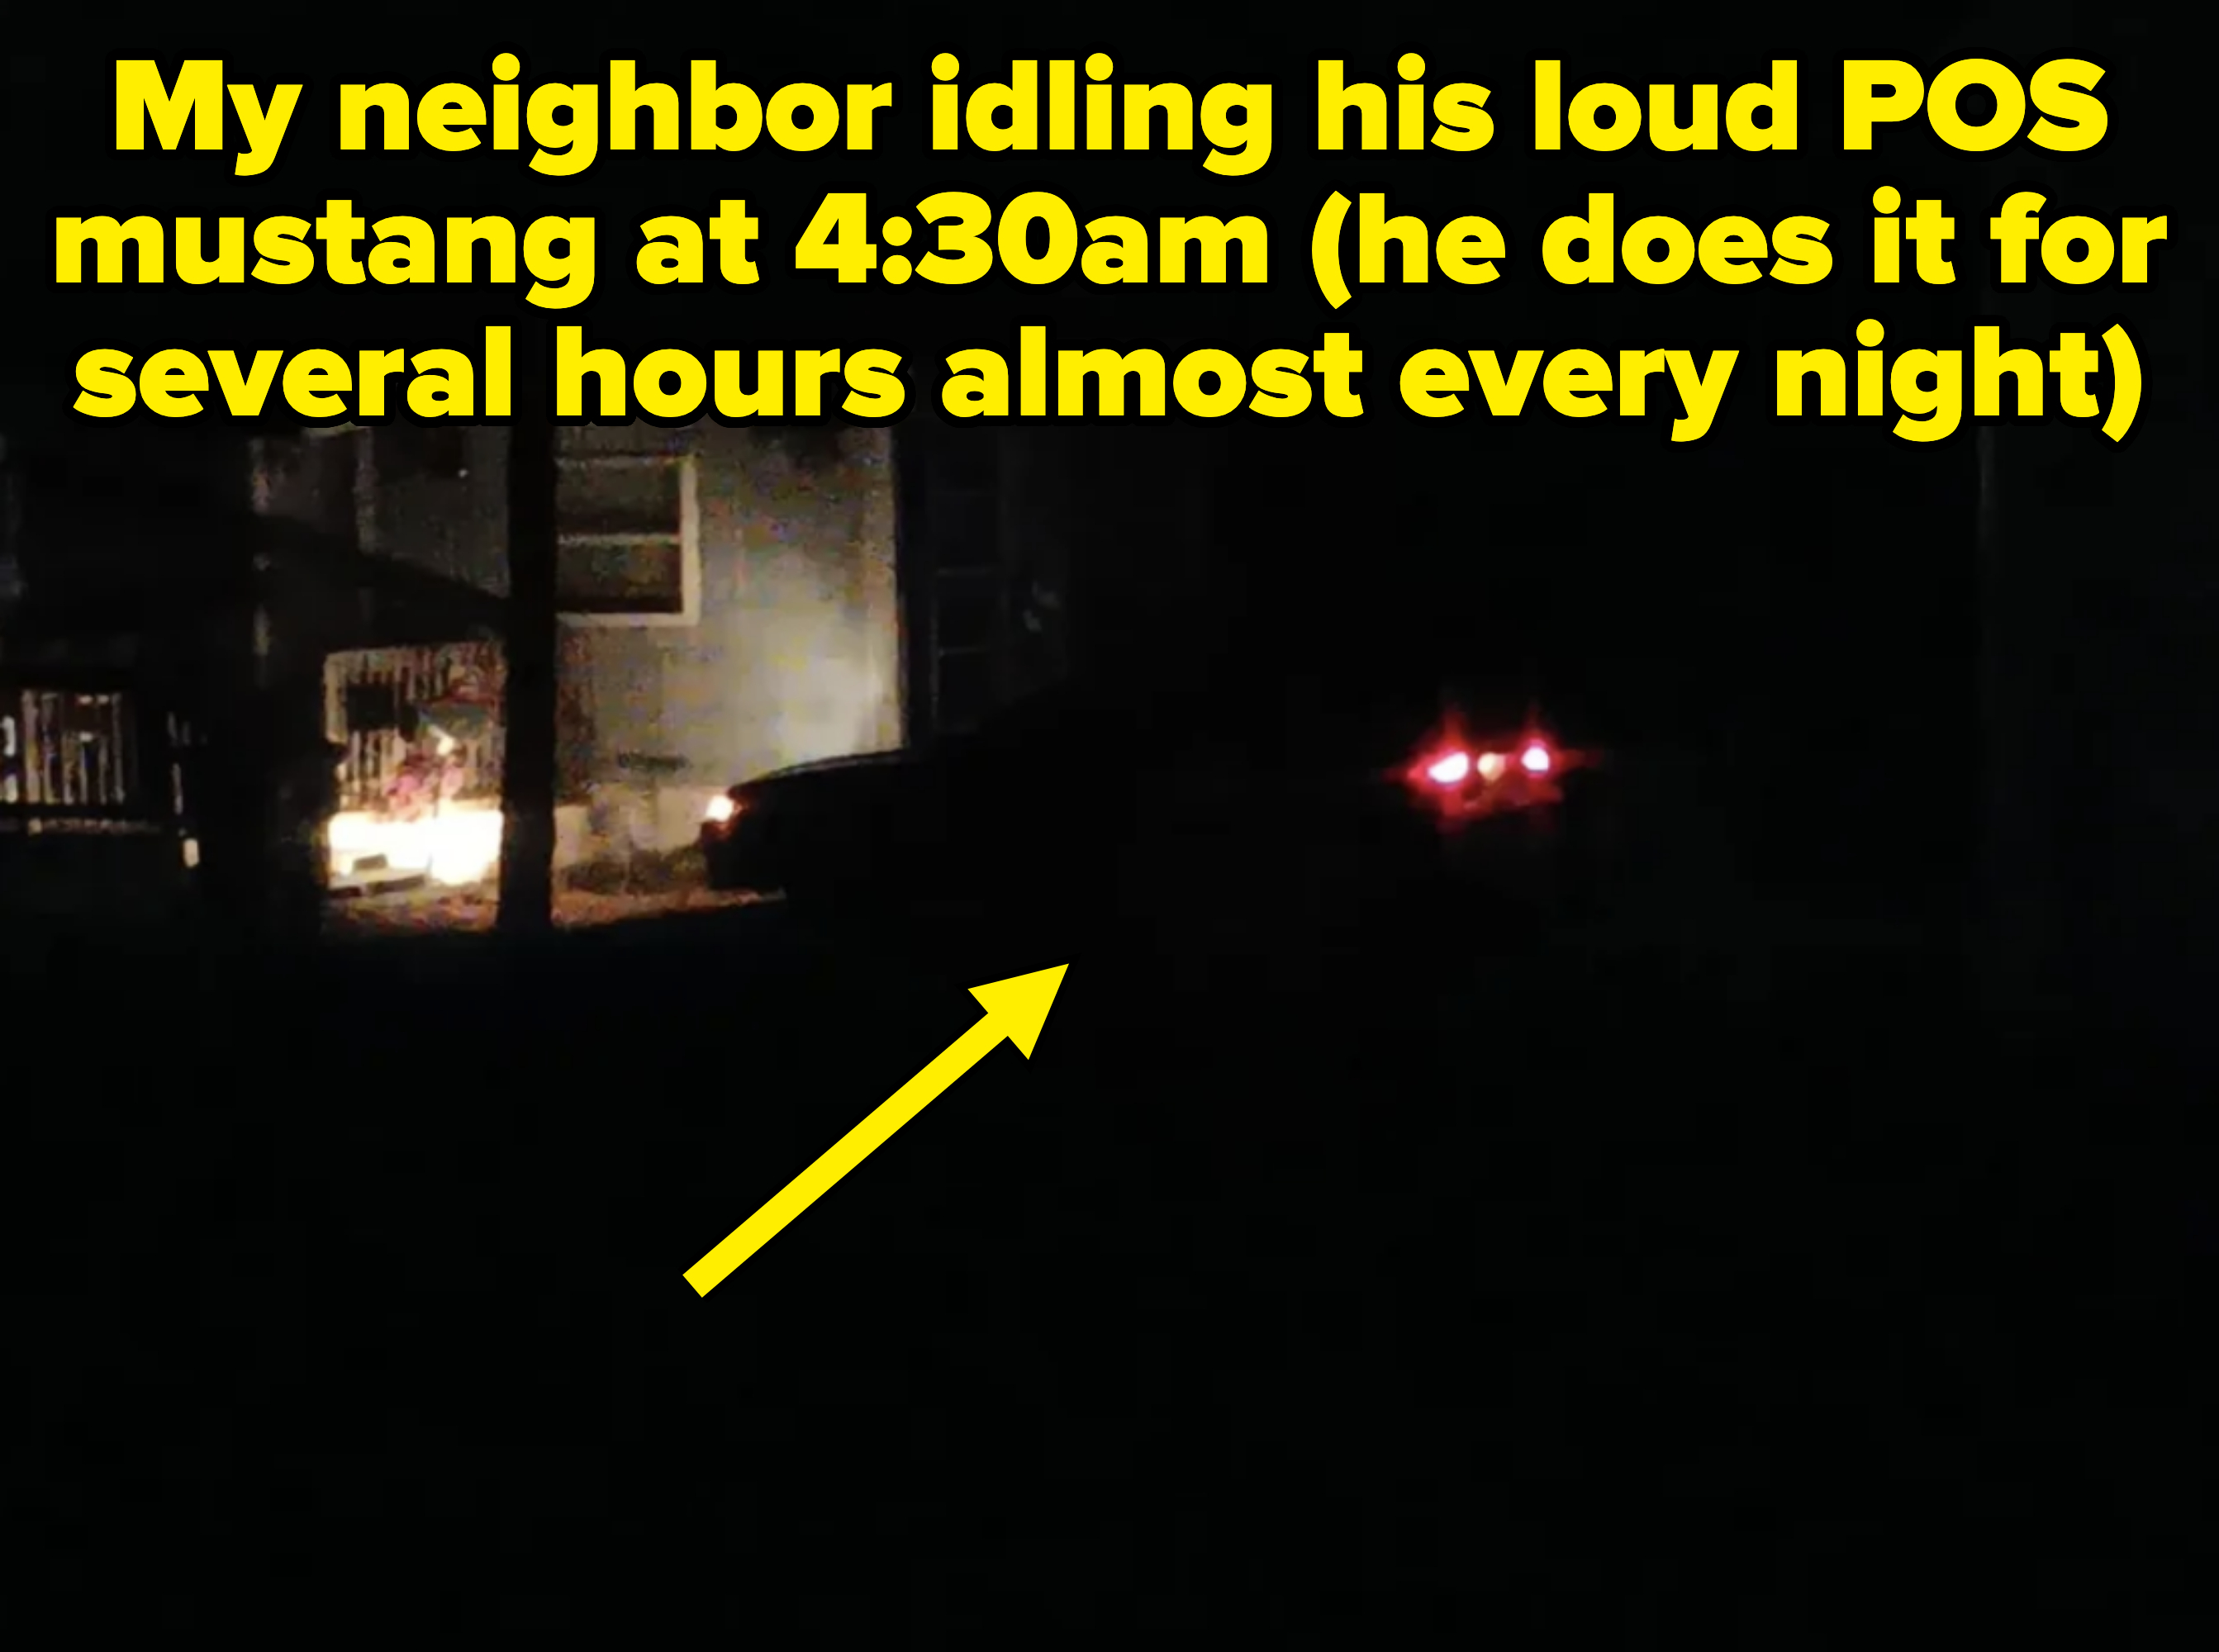 arrow pointing to a car in the dark captioned &quot;my neighbor idling his loud POS mustang at 4:30am&quot;